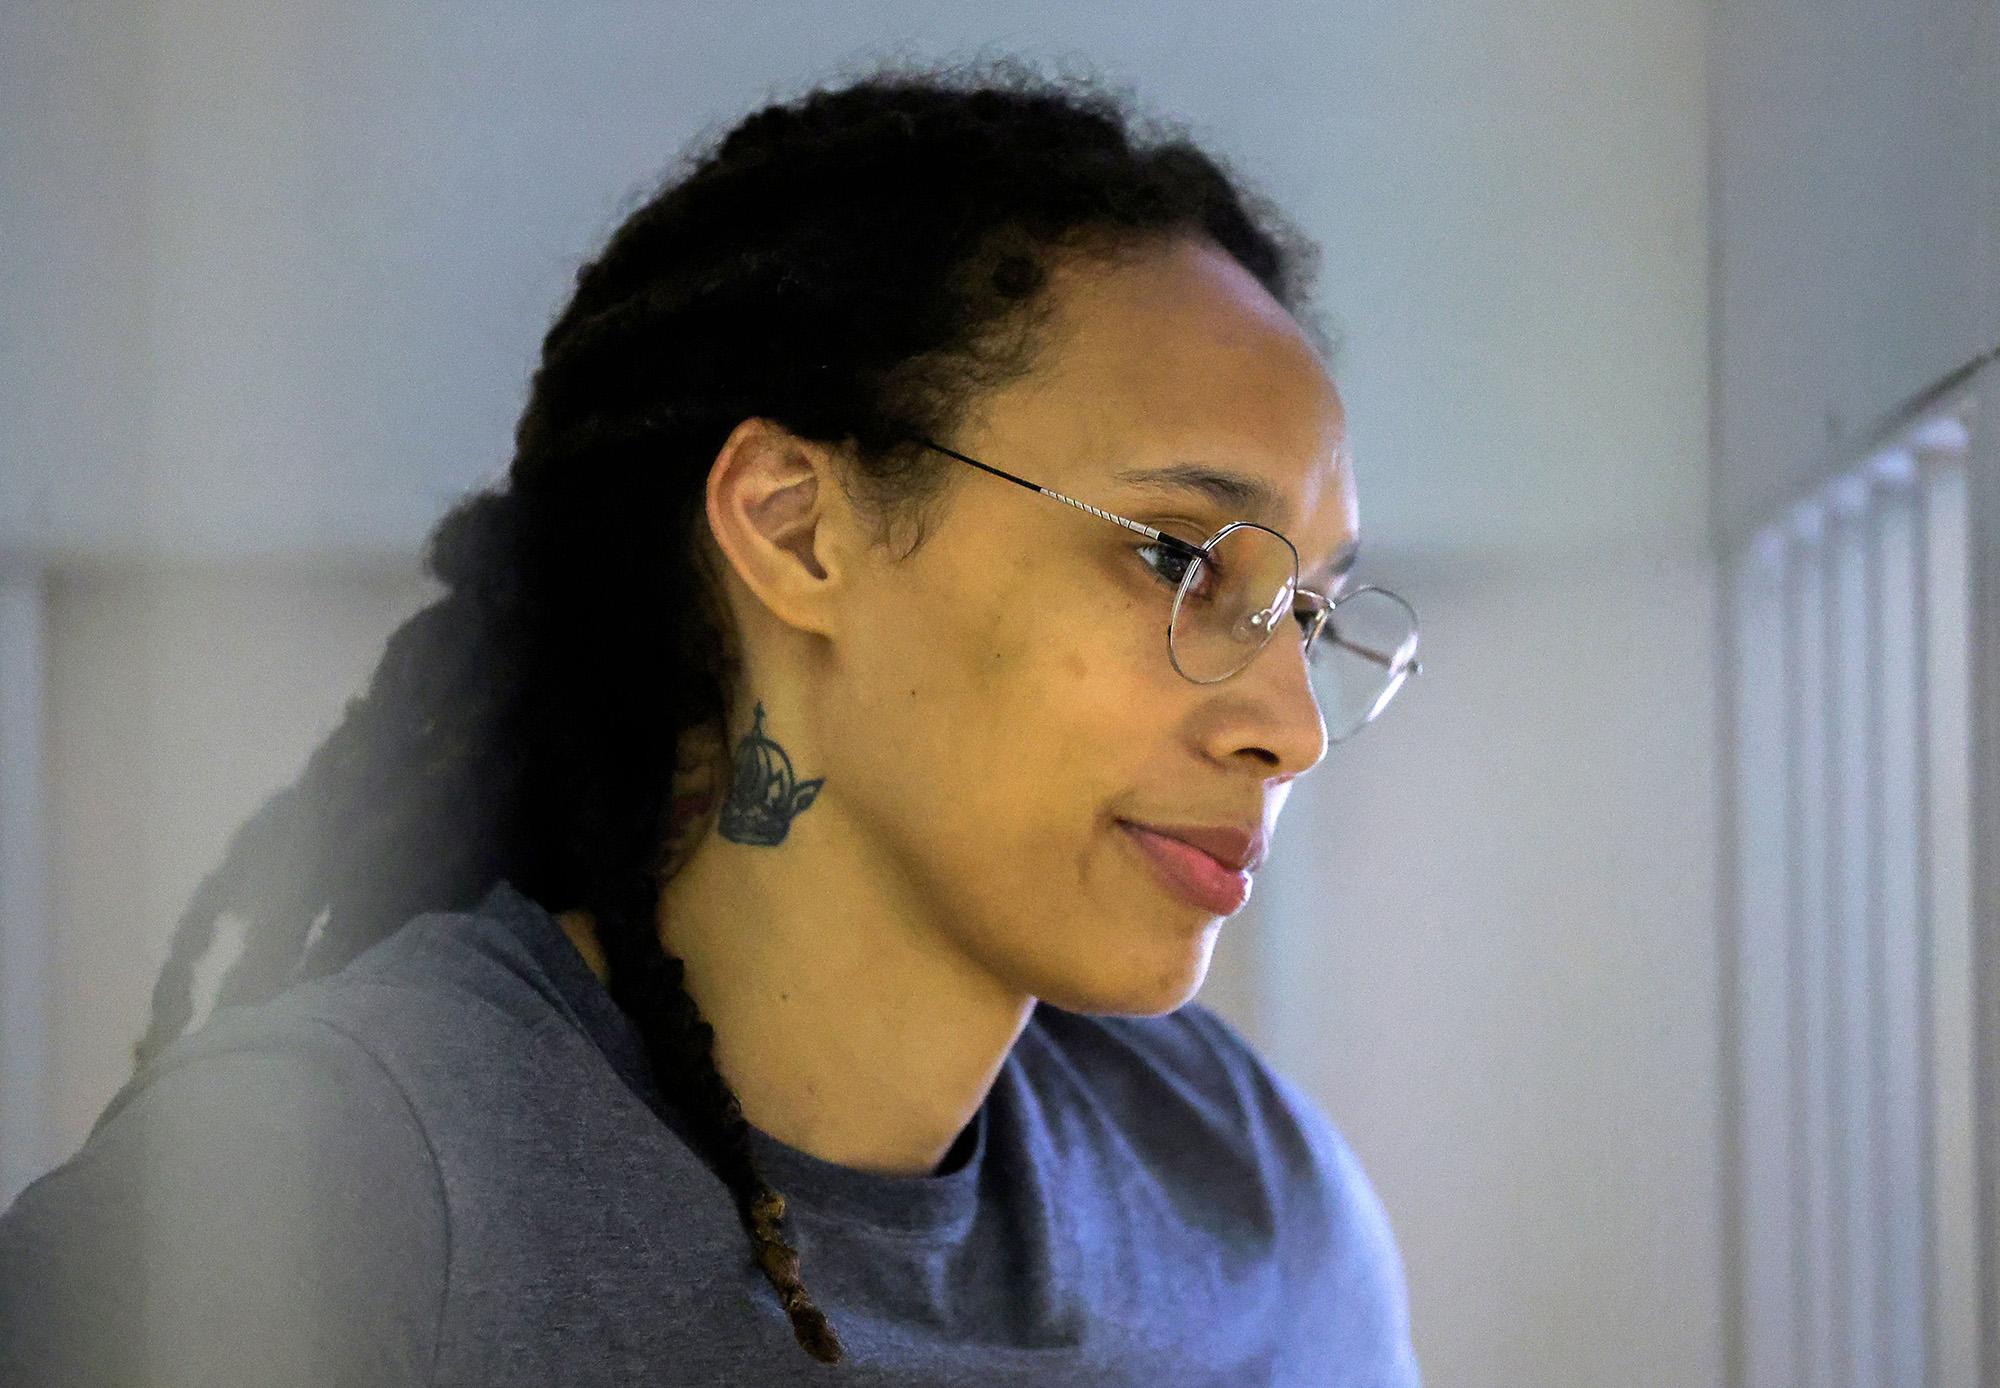 WNBA star Brittney Griner is seen during a hearing in Khimki outside Moscow, on August 4.